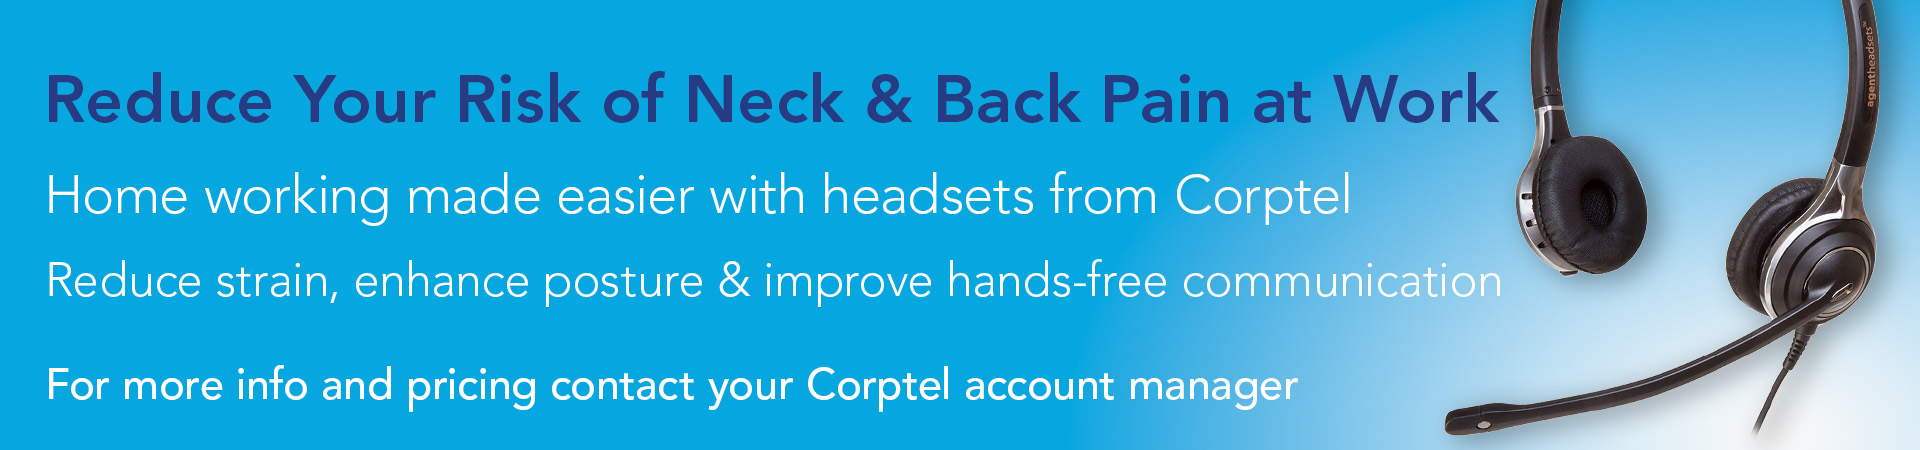 Reduce Your Risk of Neck & Back Pain at Work - Home working made easier with headsets from Corptel, Reduce Strain, enhance posture and improve hands-free communication. For more information, contact your Corptel account manager